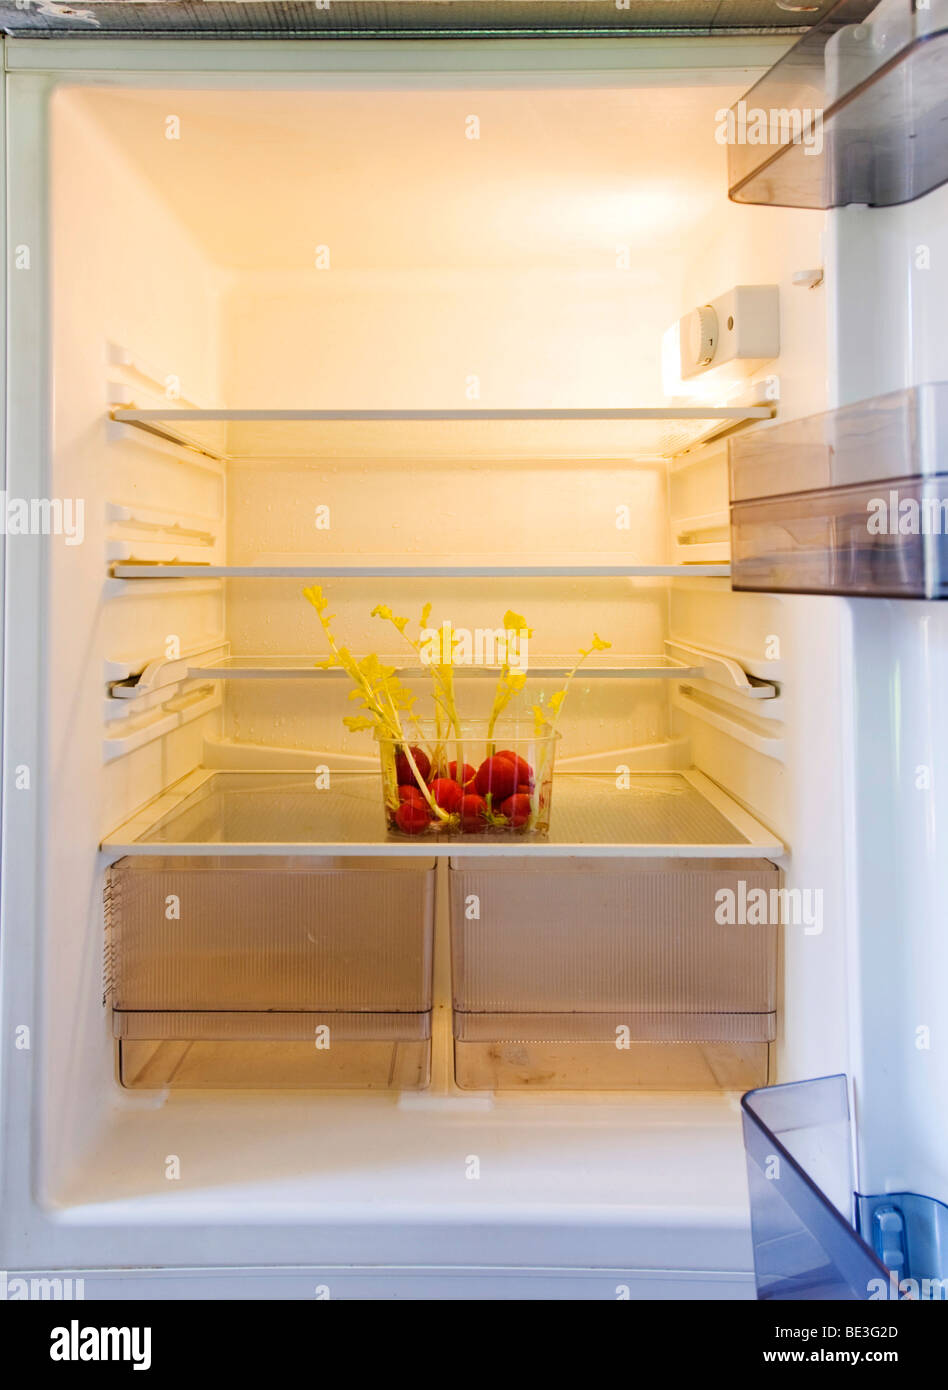 Empty fridge with radishes in a plastic box, yellow germ buds already sprouting Stock Photo